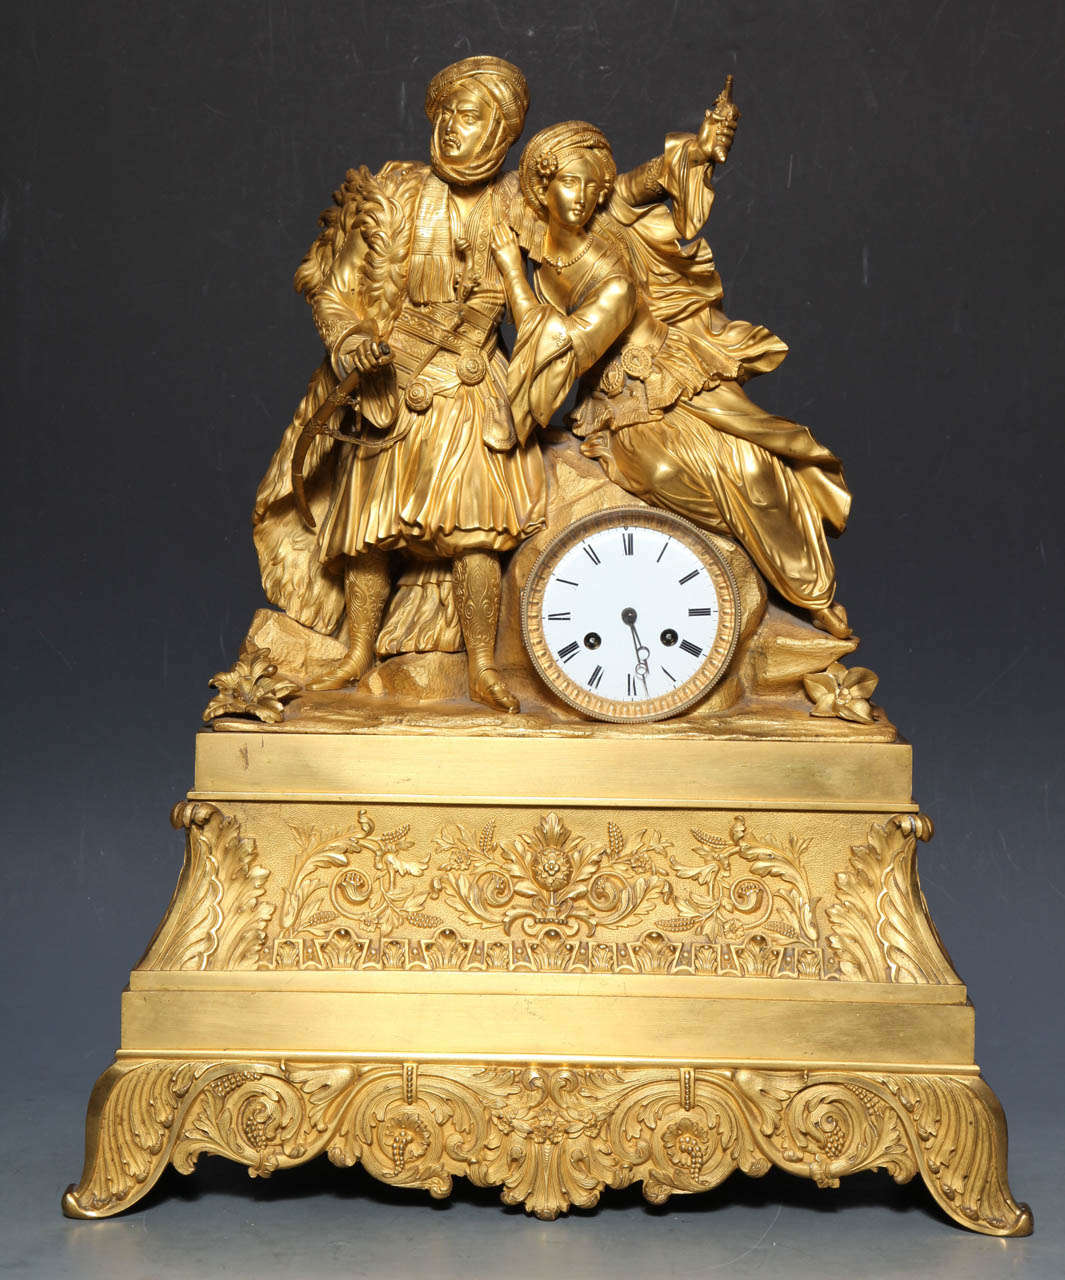 An Impressive and very large French Gilt Dore Bronze Clock with Arab Prince and Princess made for the Oriental Market. With the European market entranced with all the oriental fantasy that their homes would allow, artists and artisans turned to the